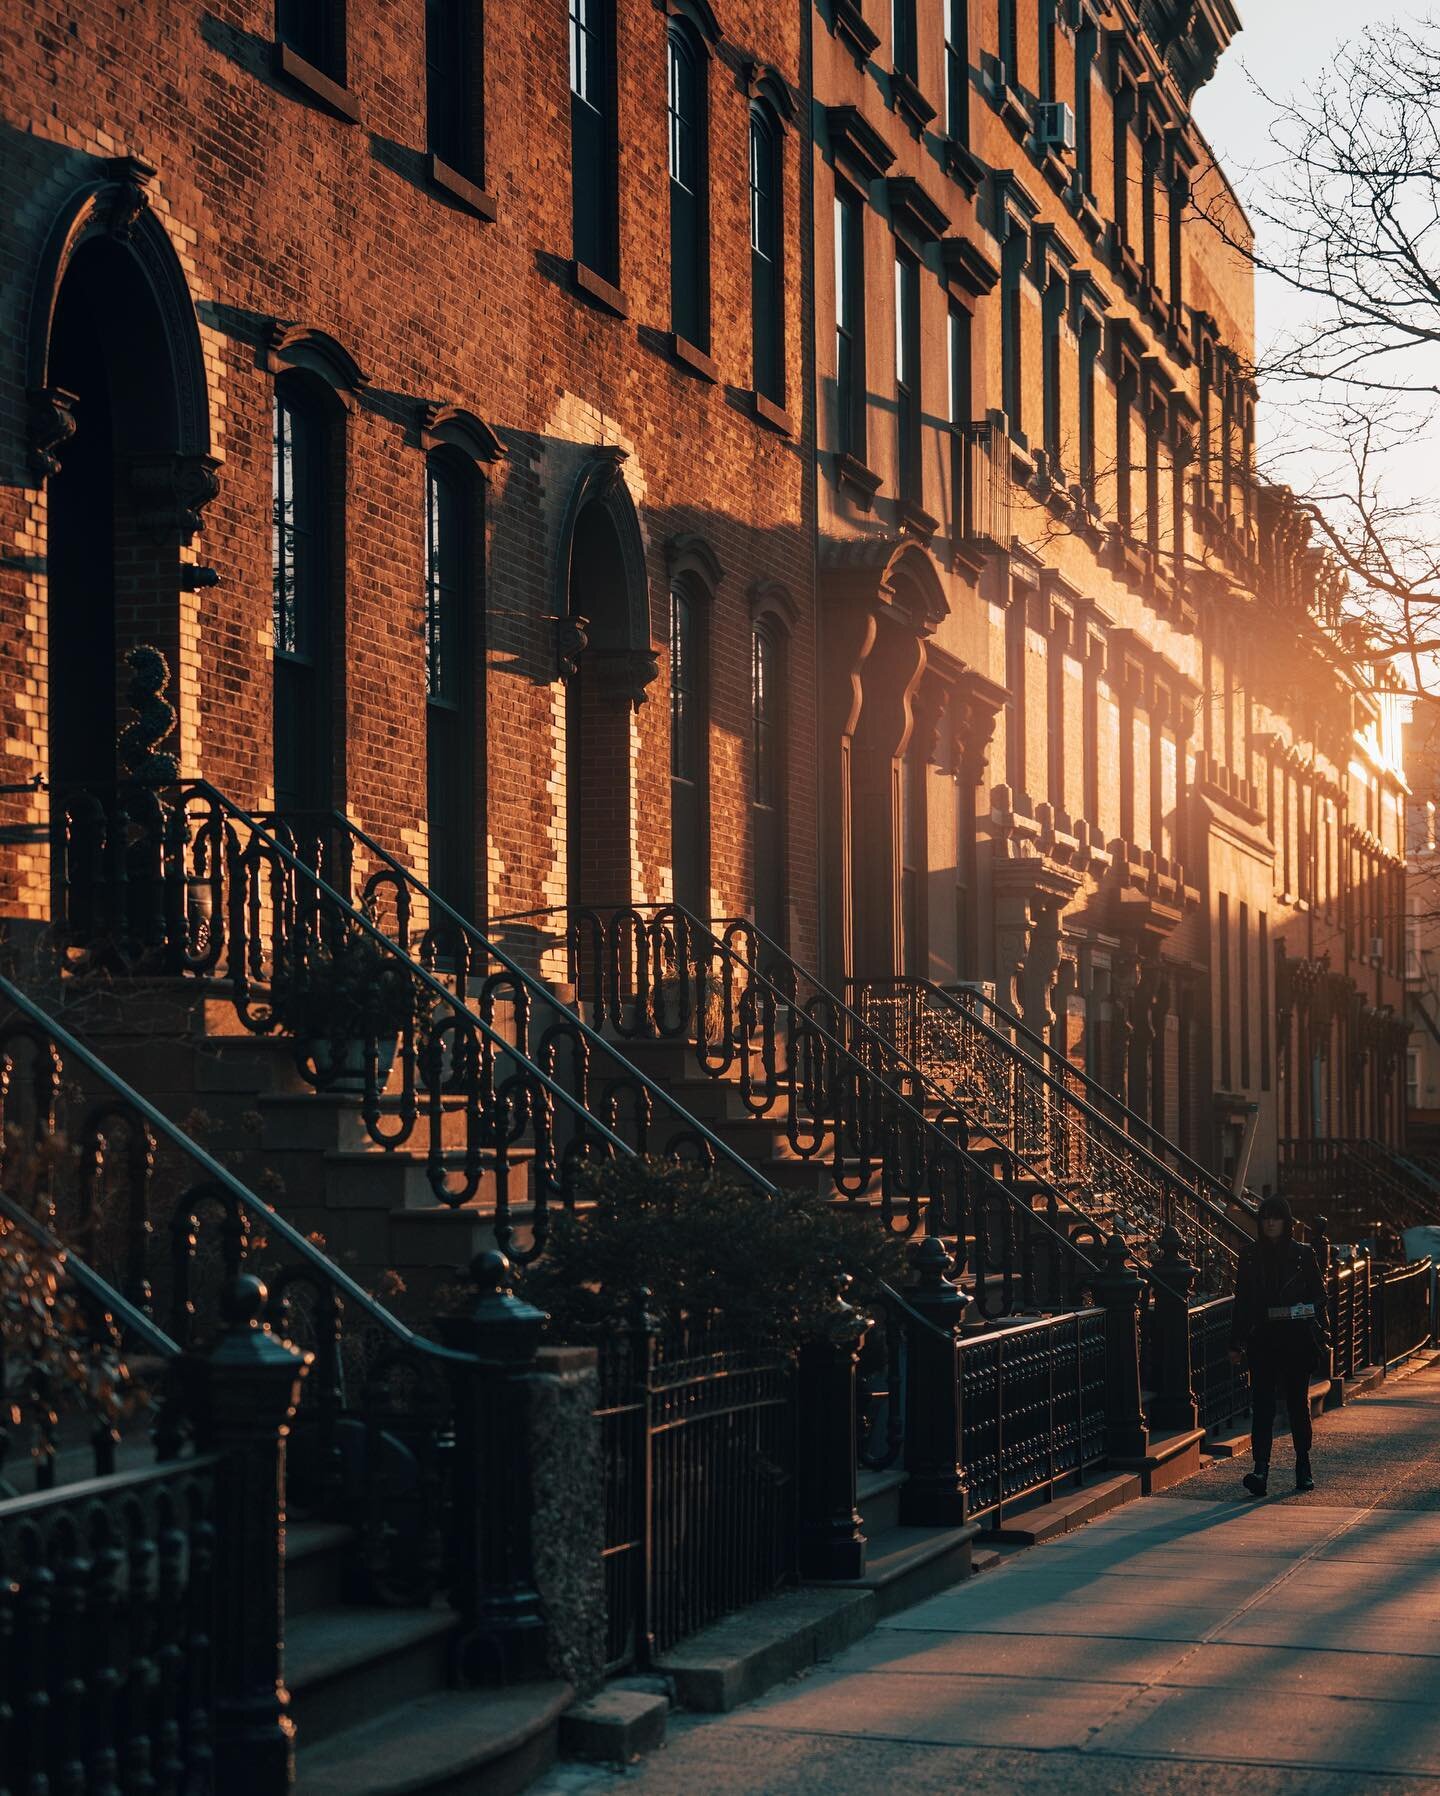 Sunset Light in Greenpoint adds an extra bit of charm to the already beautiful houses of the neighborhood